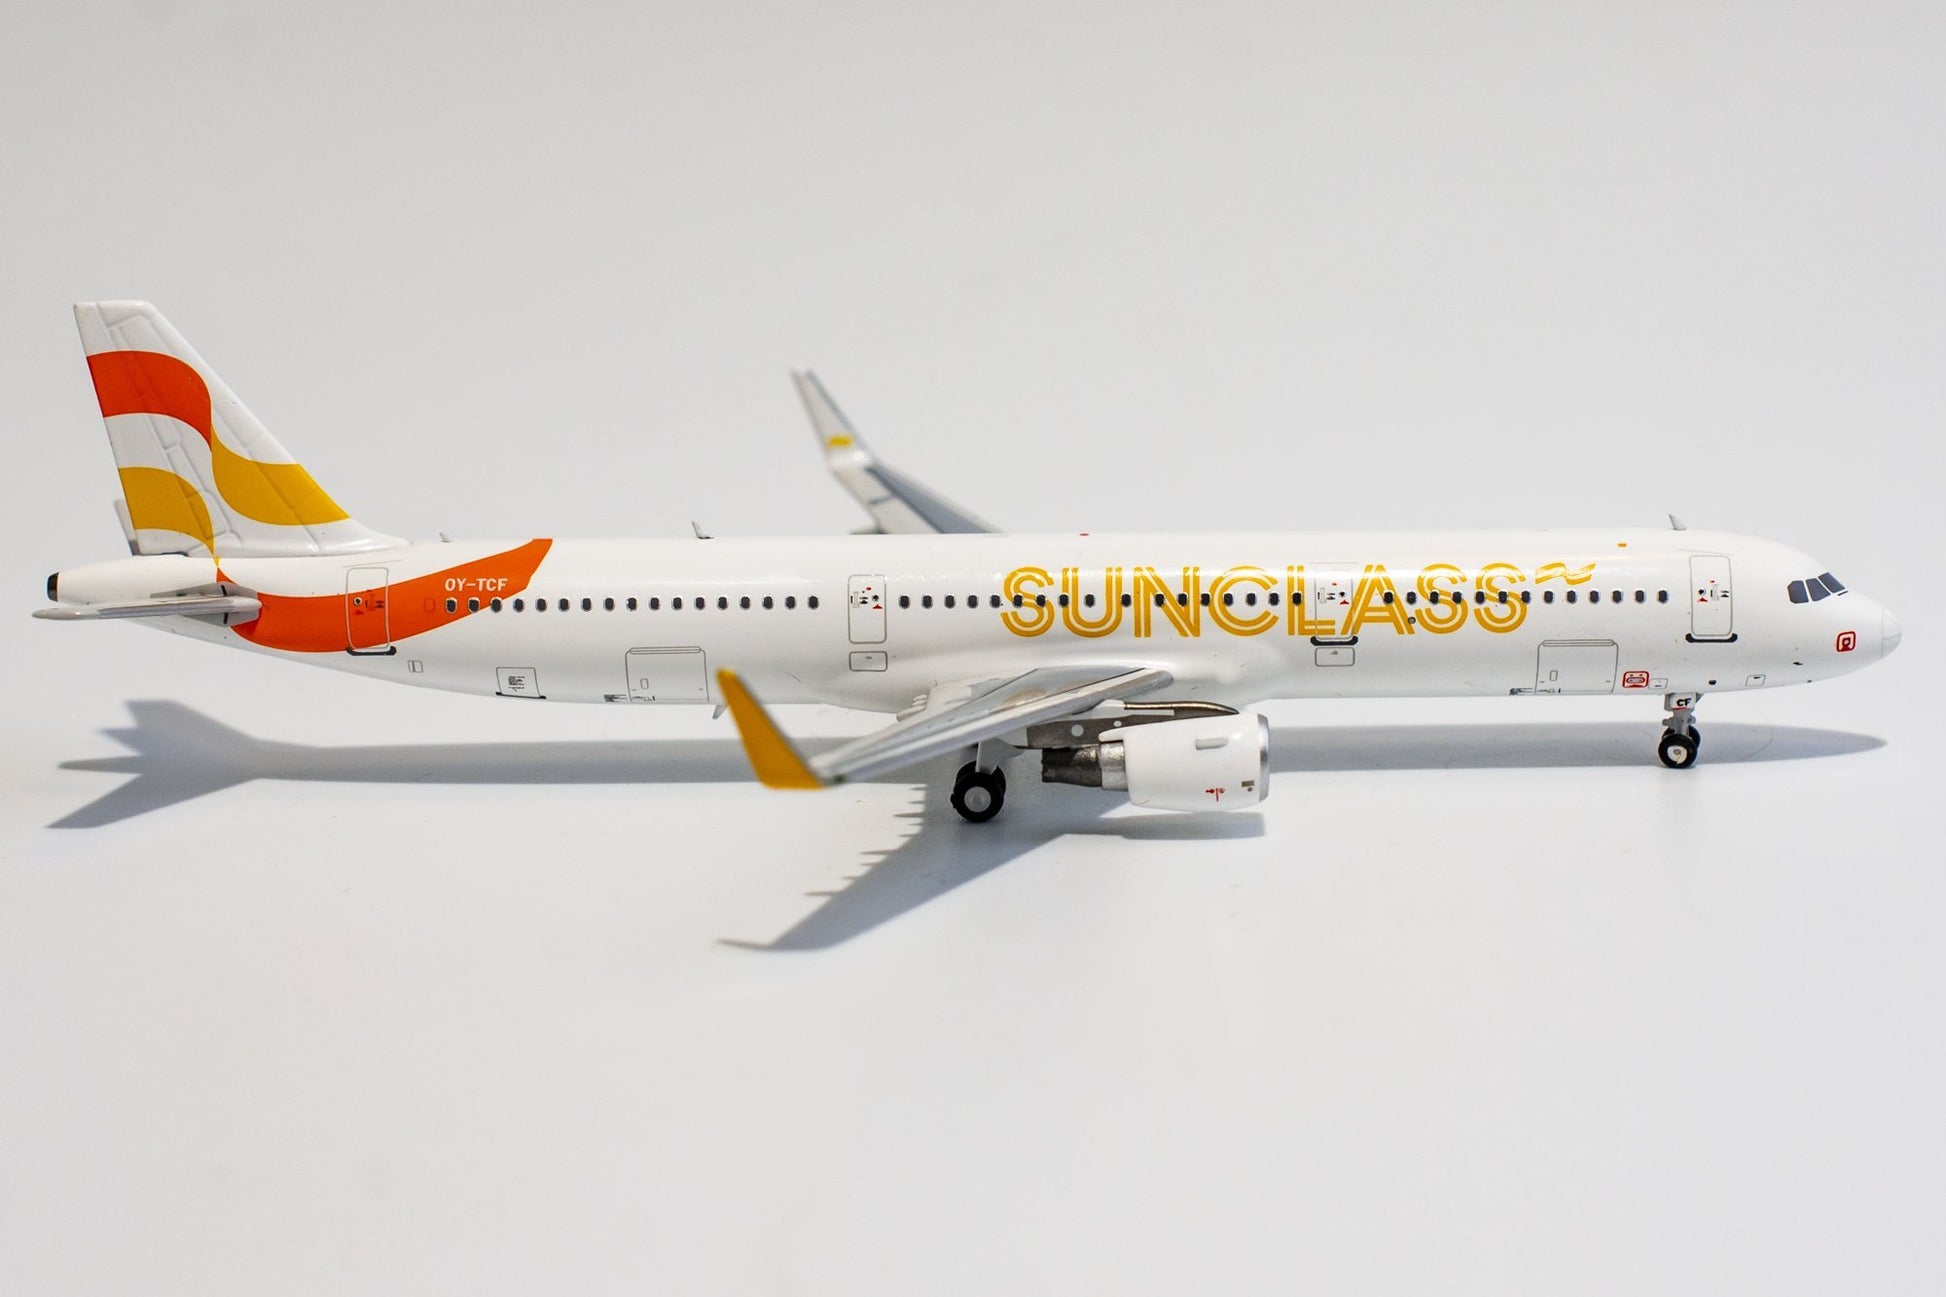 1/400 Sunclass Airlines A321 NG Models 13028 - Midwest Model Store